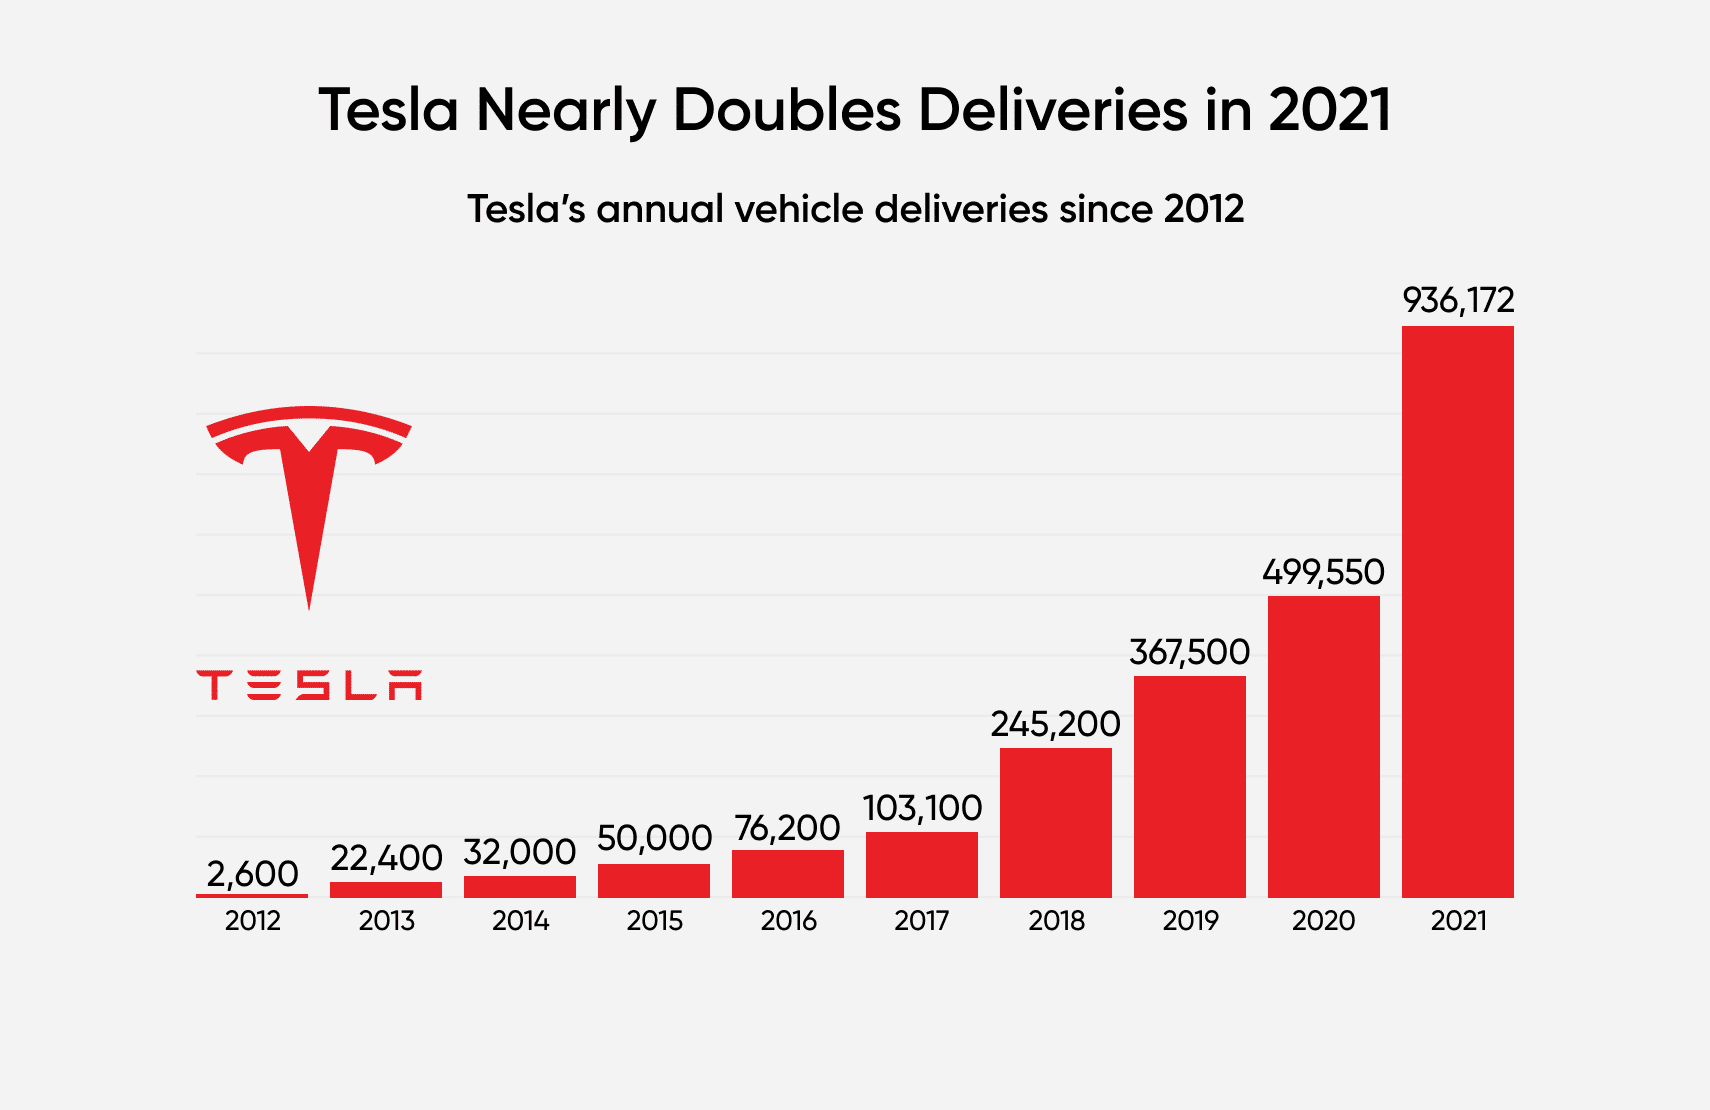 Tesla nearly doubles deliveries in 2021